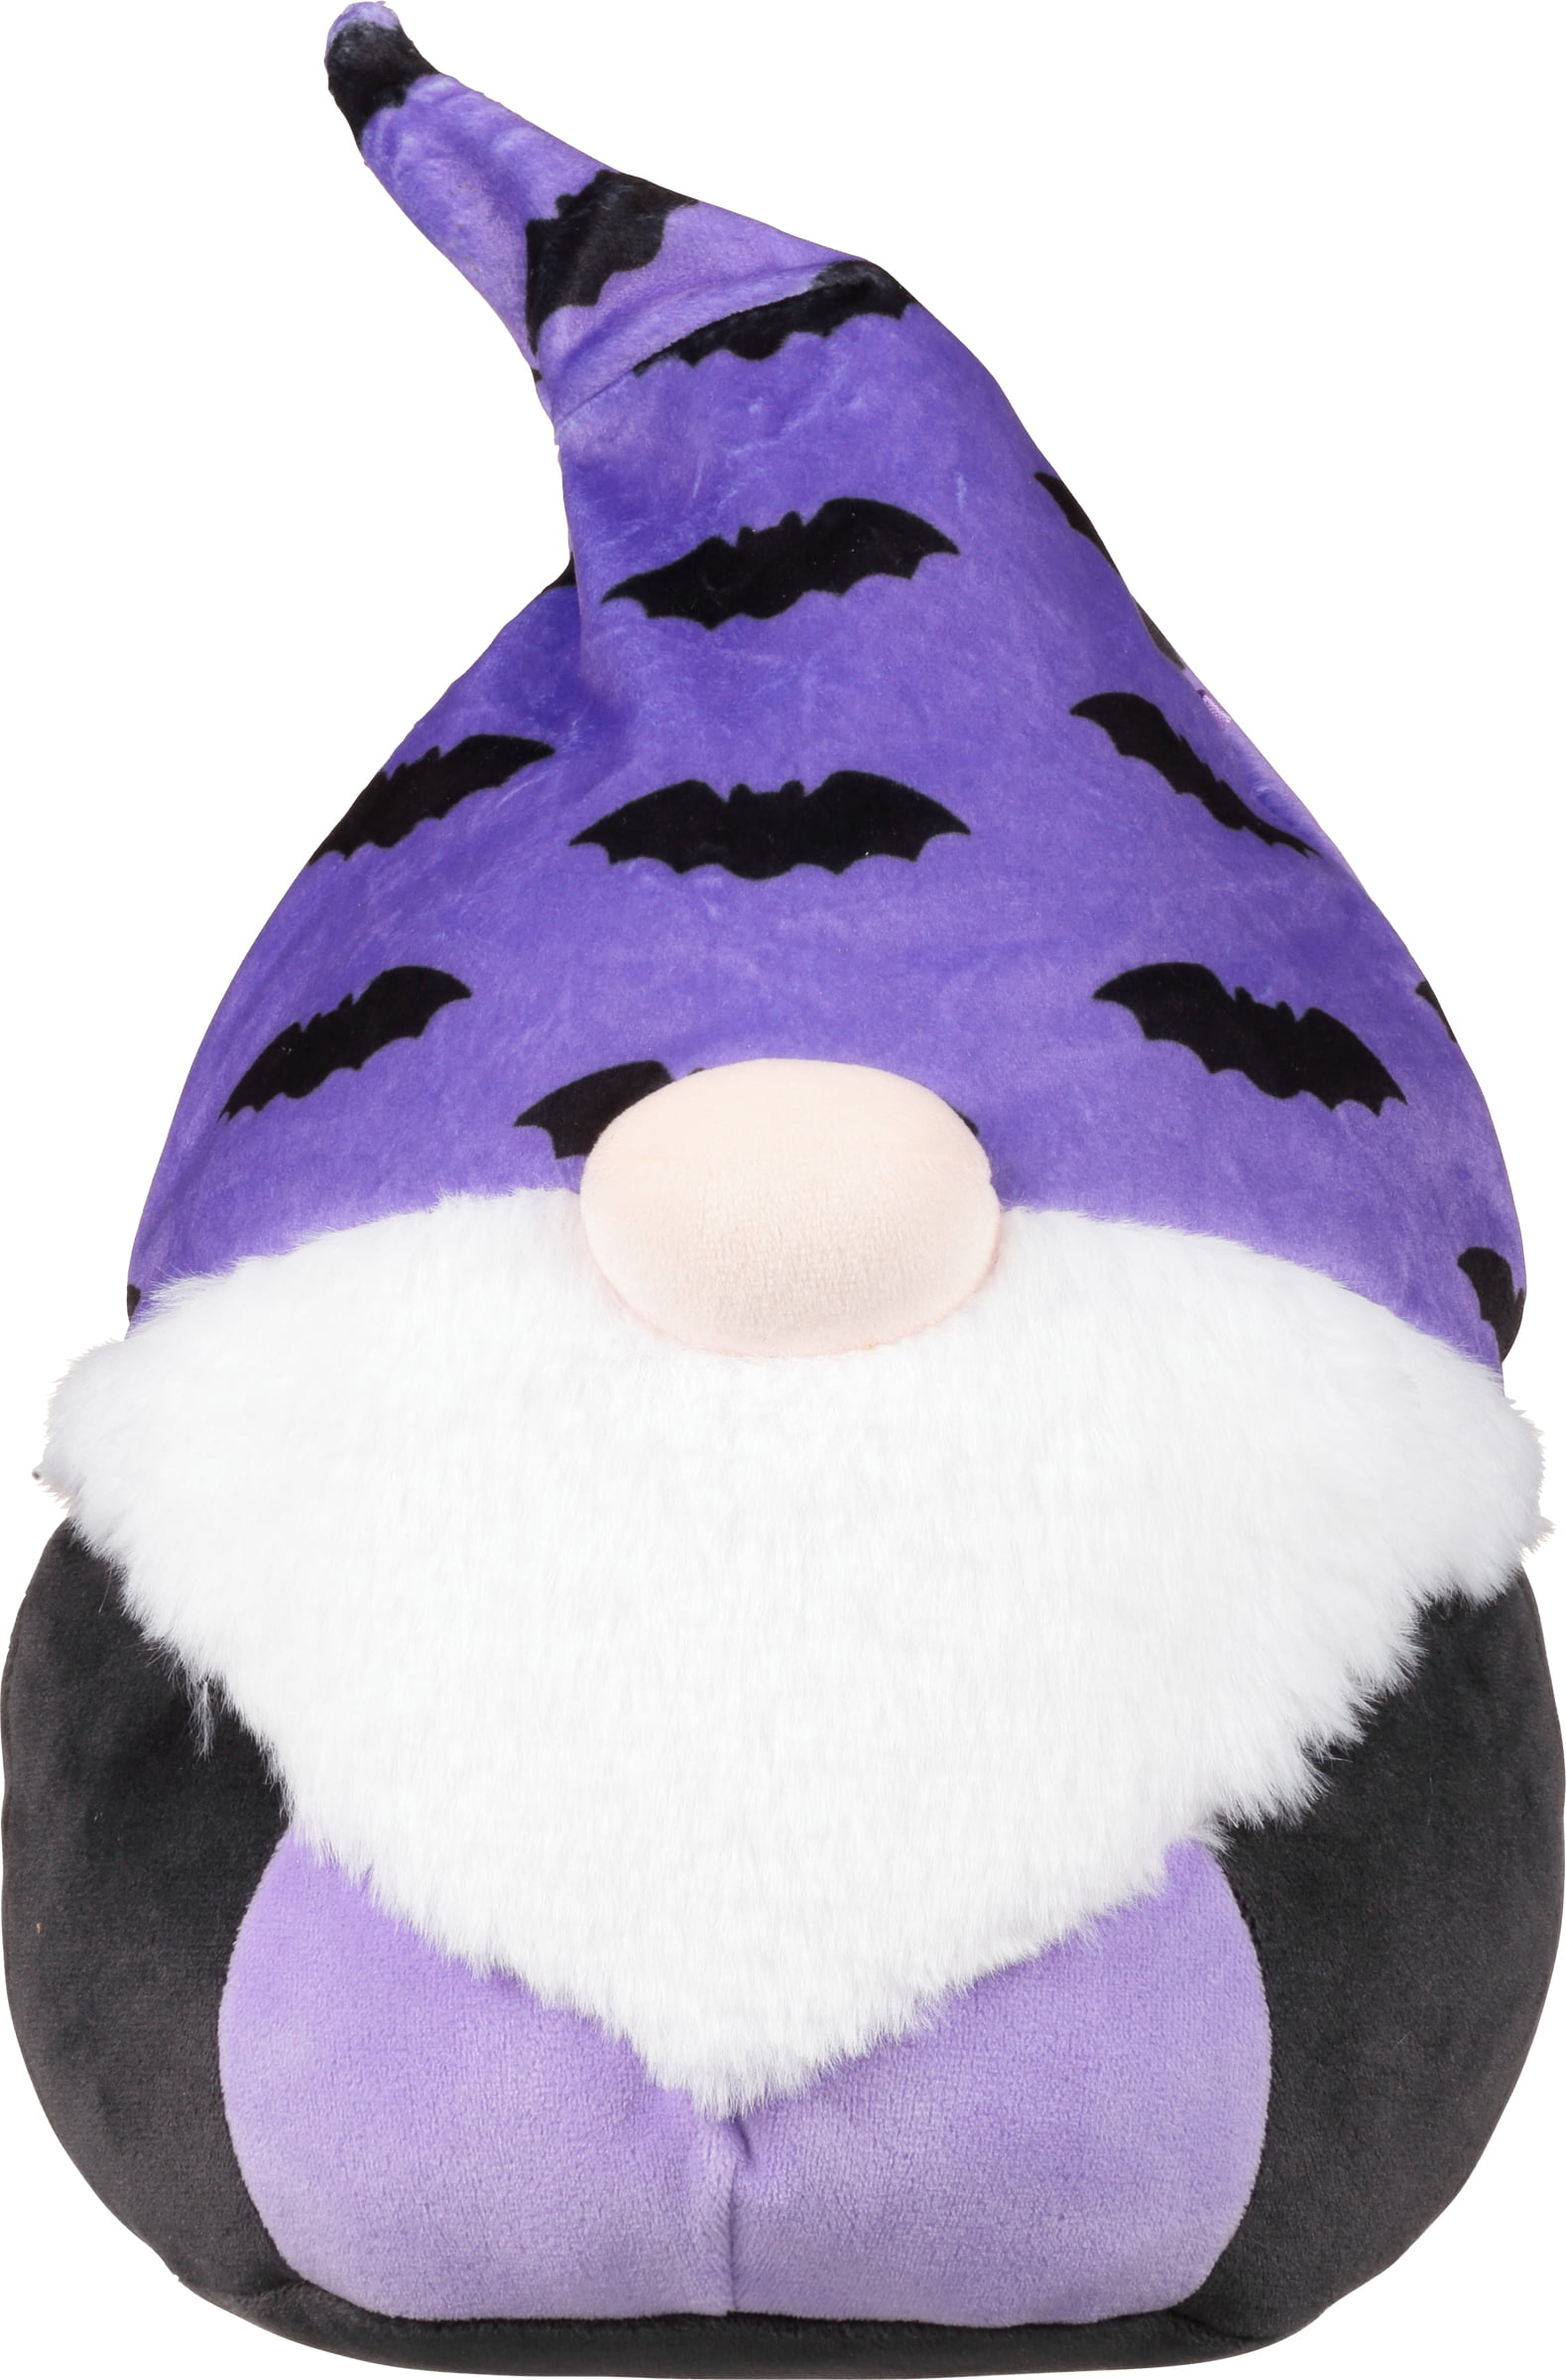 Squishmallows Official Kellytoys Plush 8 Inch Halloween Otto the Grim Reaper